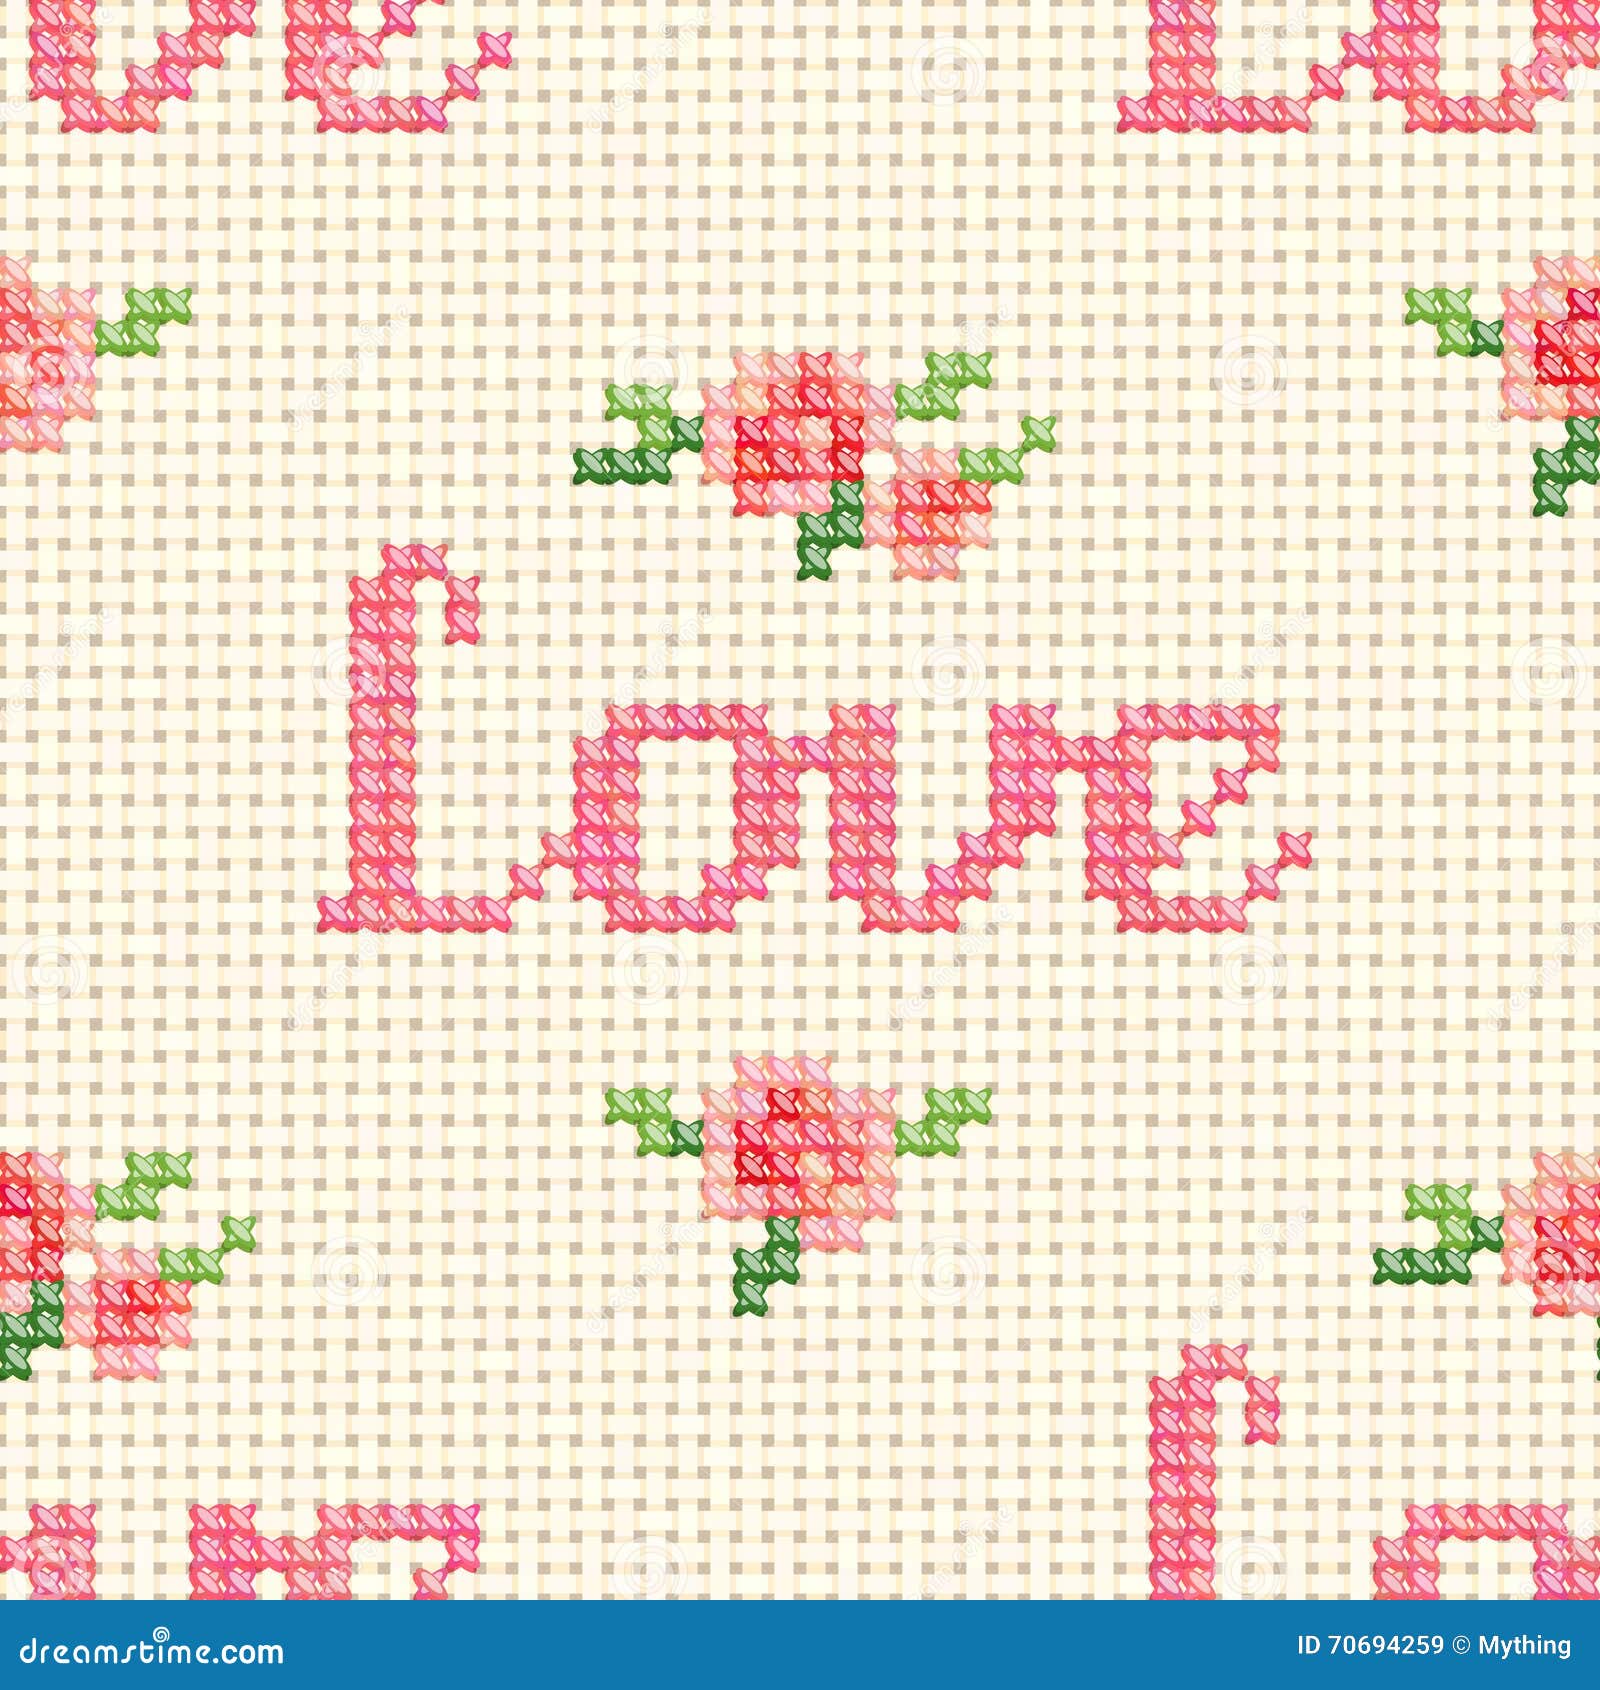 Seamless Love and Pink Roses Cross Stitch Pattern